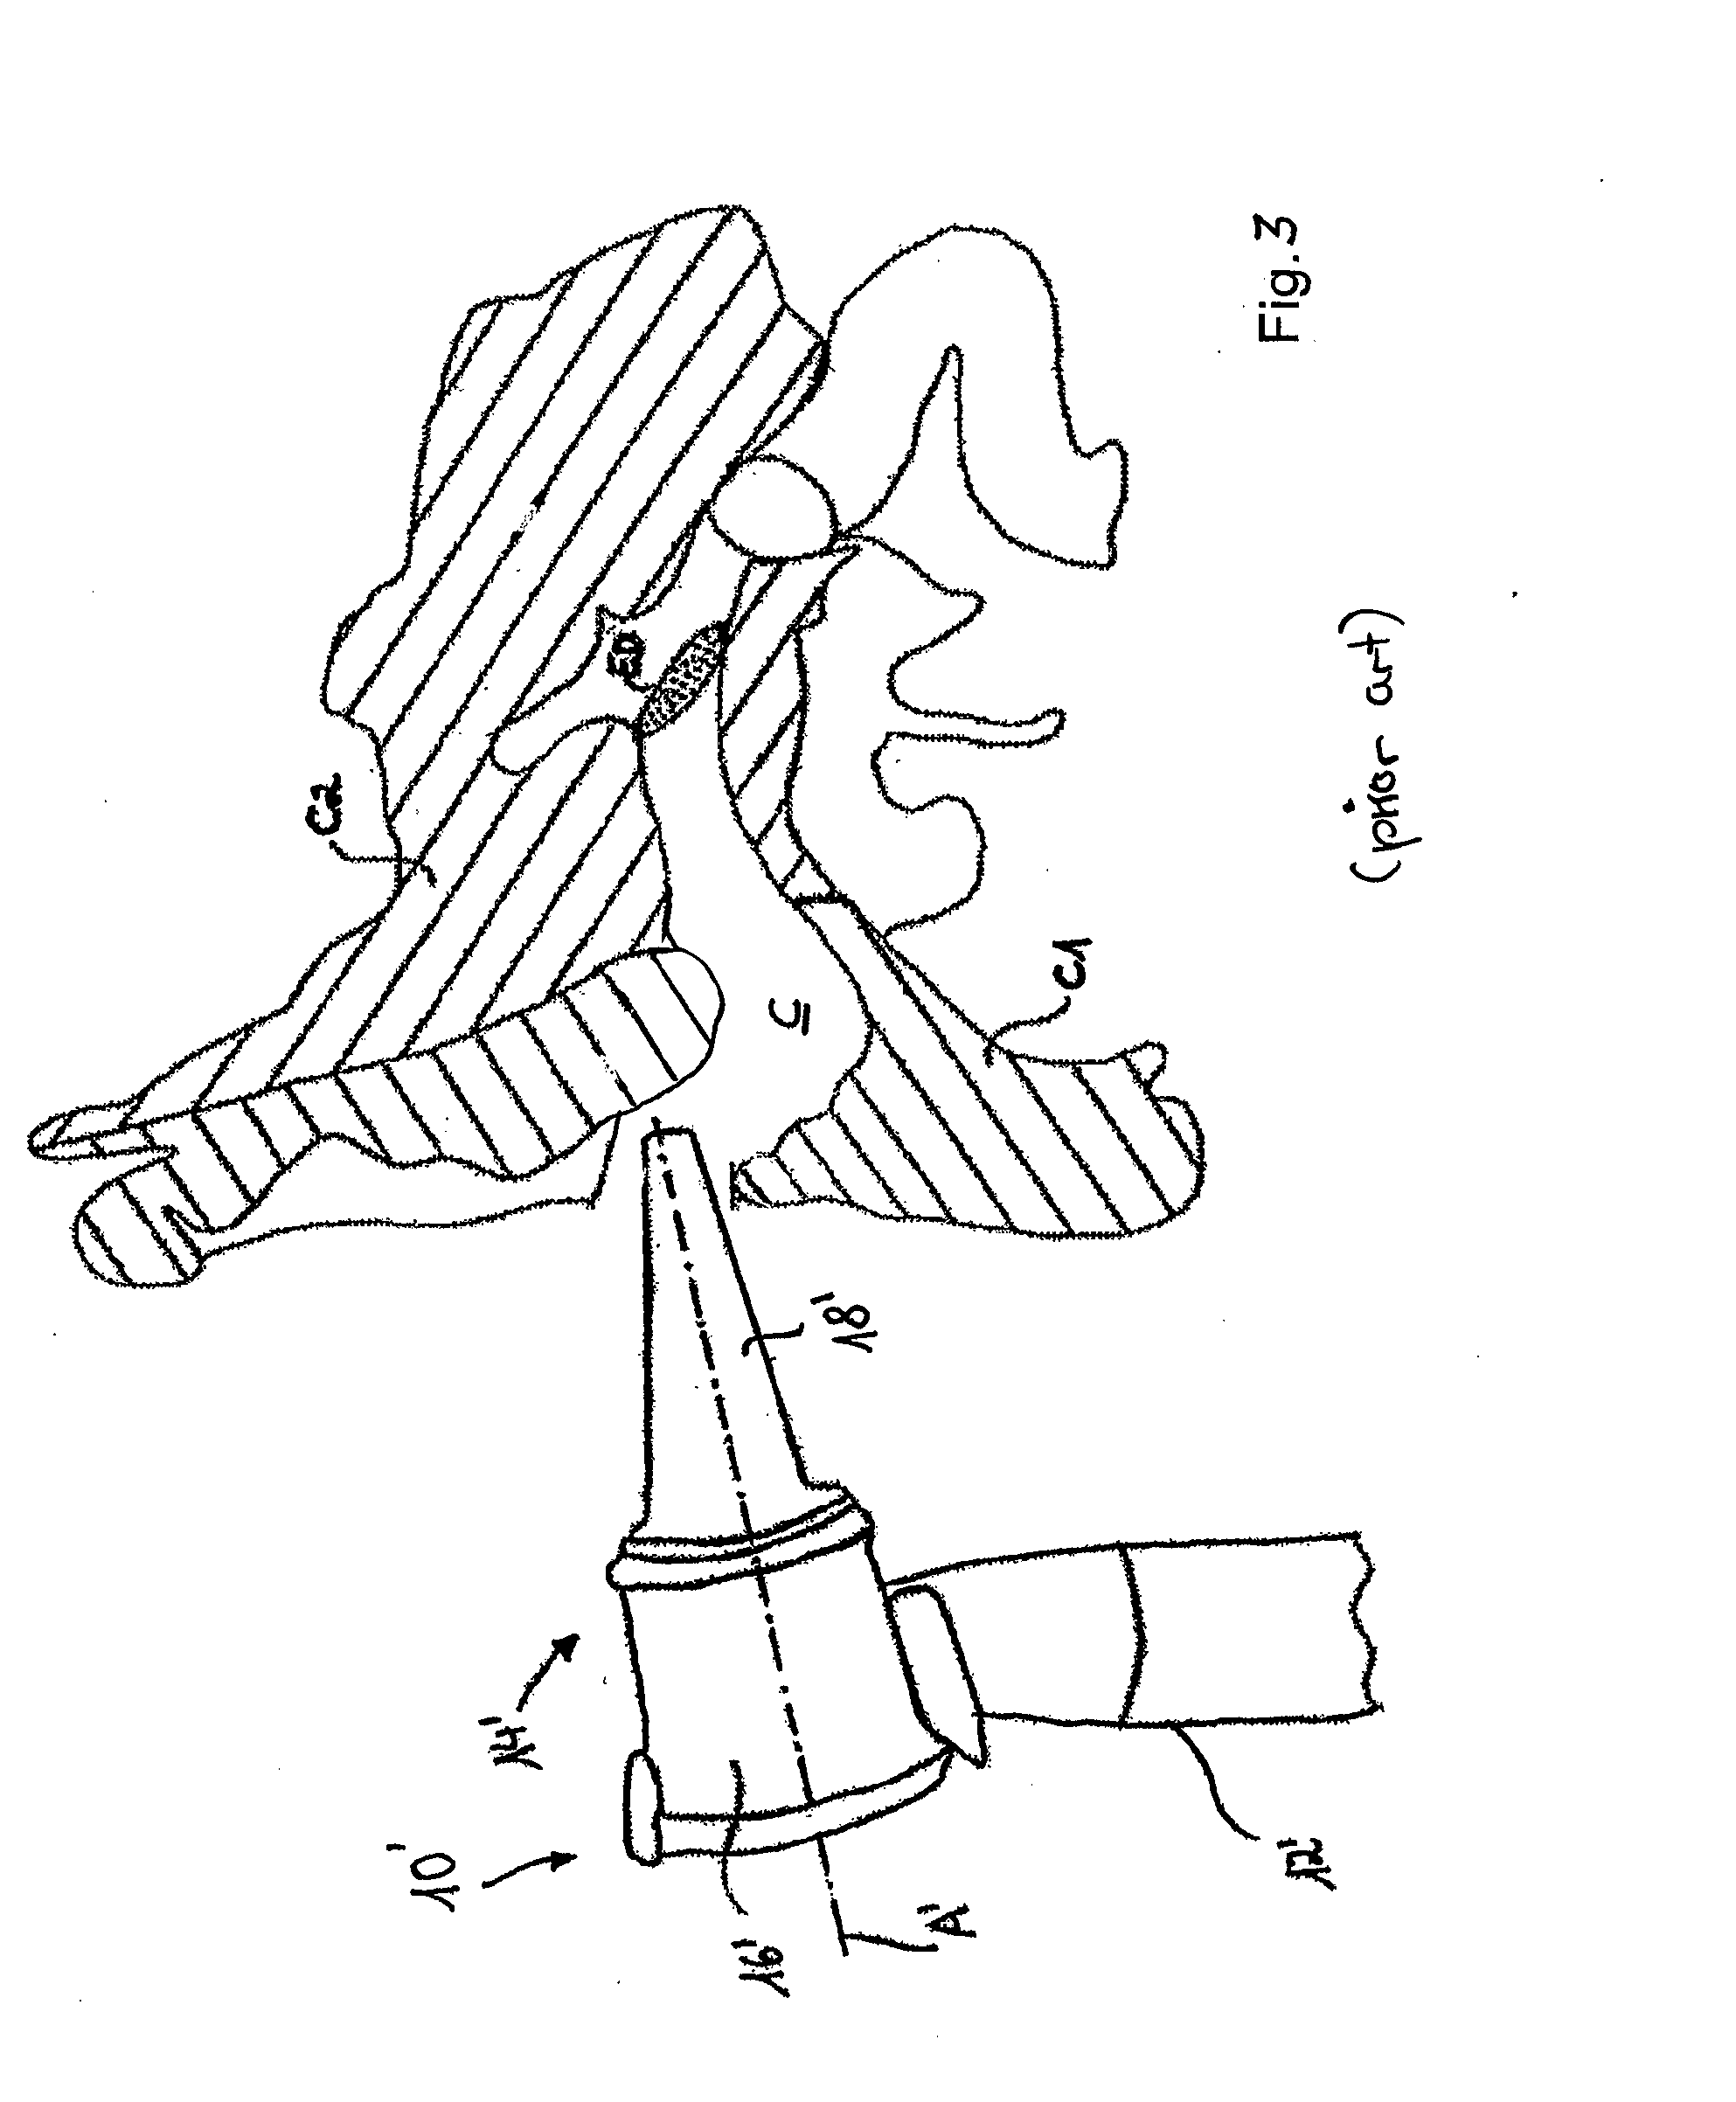 Method for identifying objects in a subject's ear